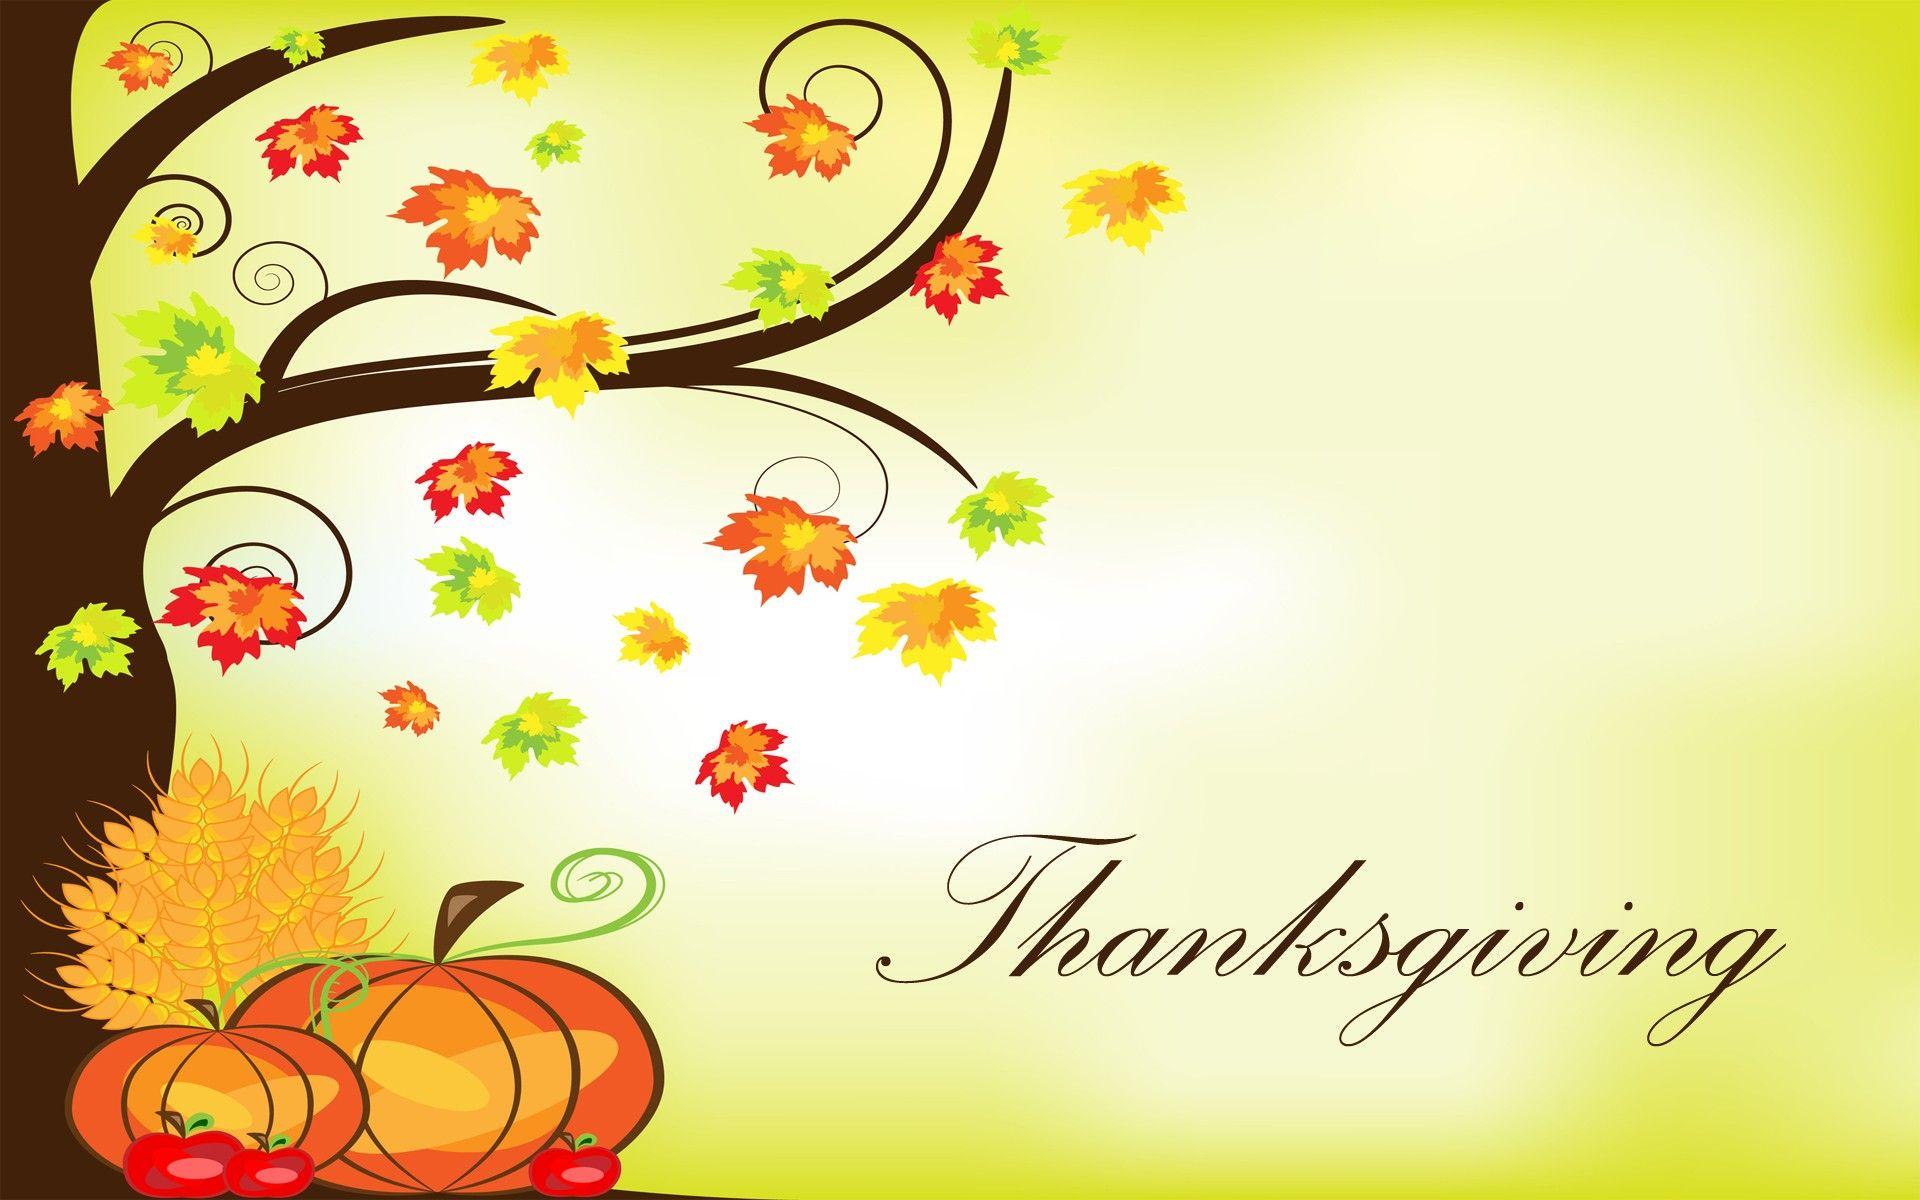 happy thanksgiving wishes Large Image. Thanksgiving image, Thanksgiving picture, Happy thanksgiving day